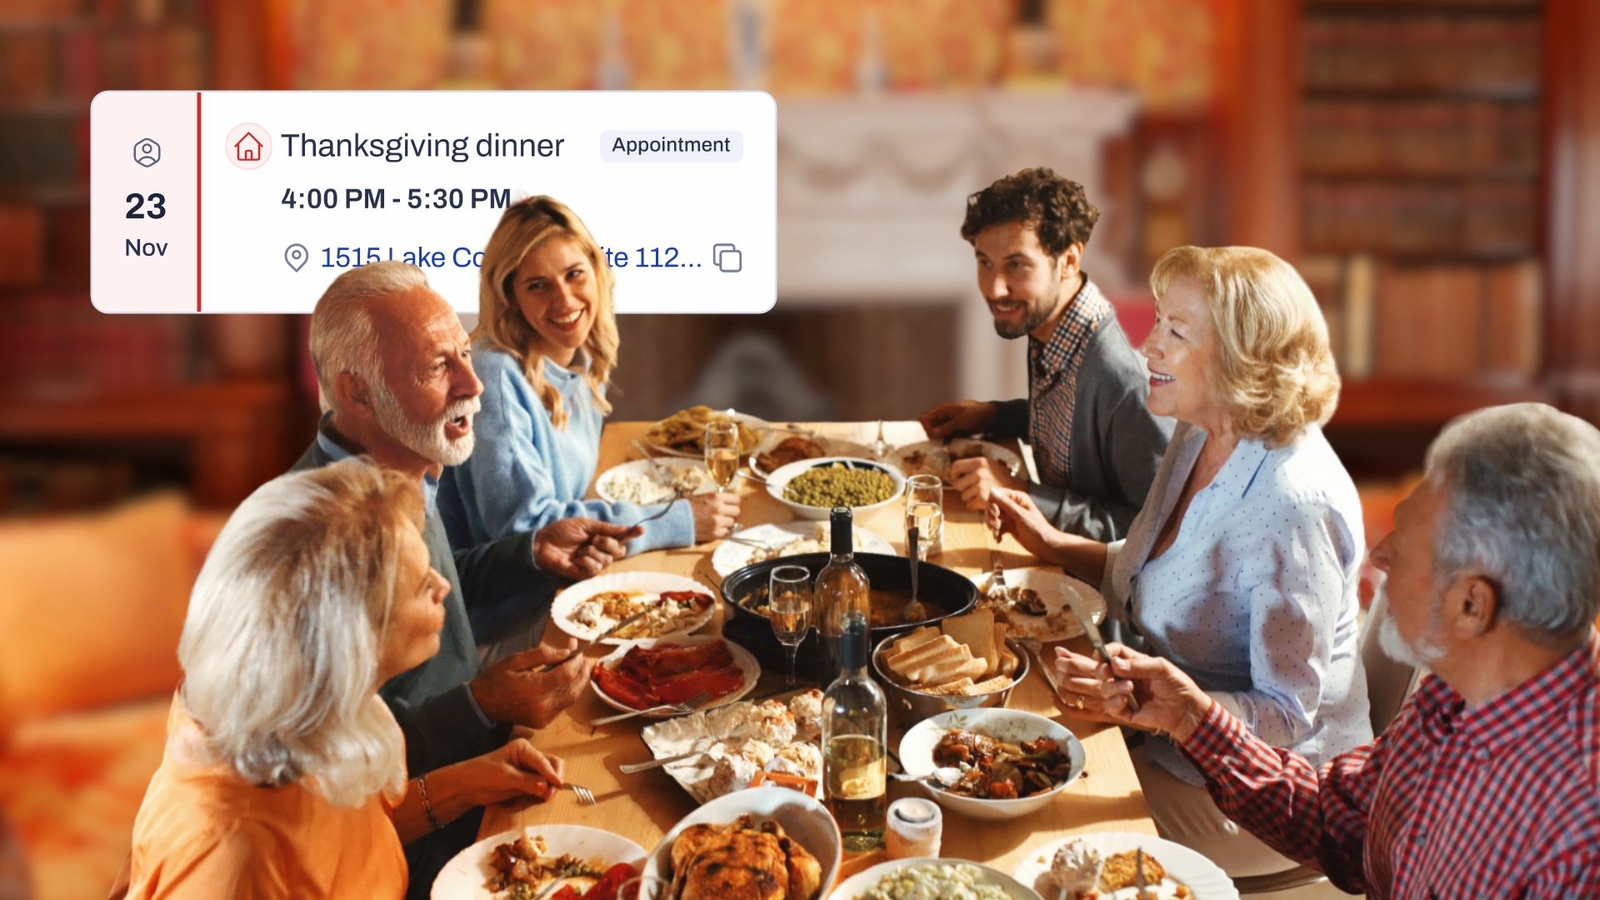 Thanksgiving Planning Made Easy with Hubmee's Organizational Tools